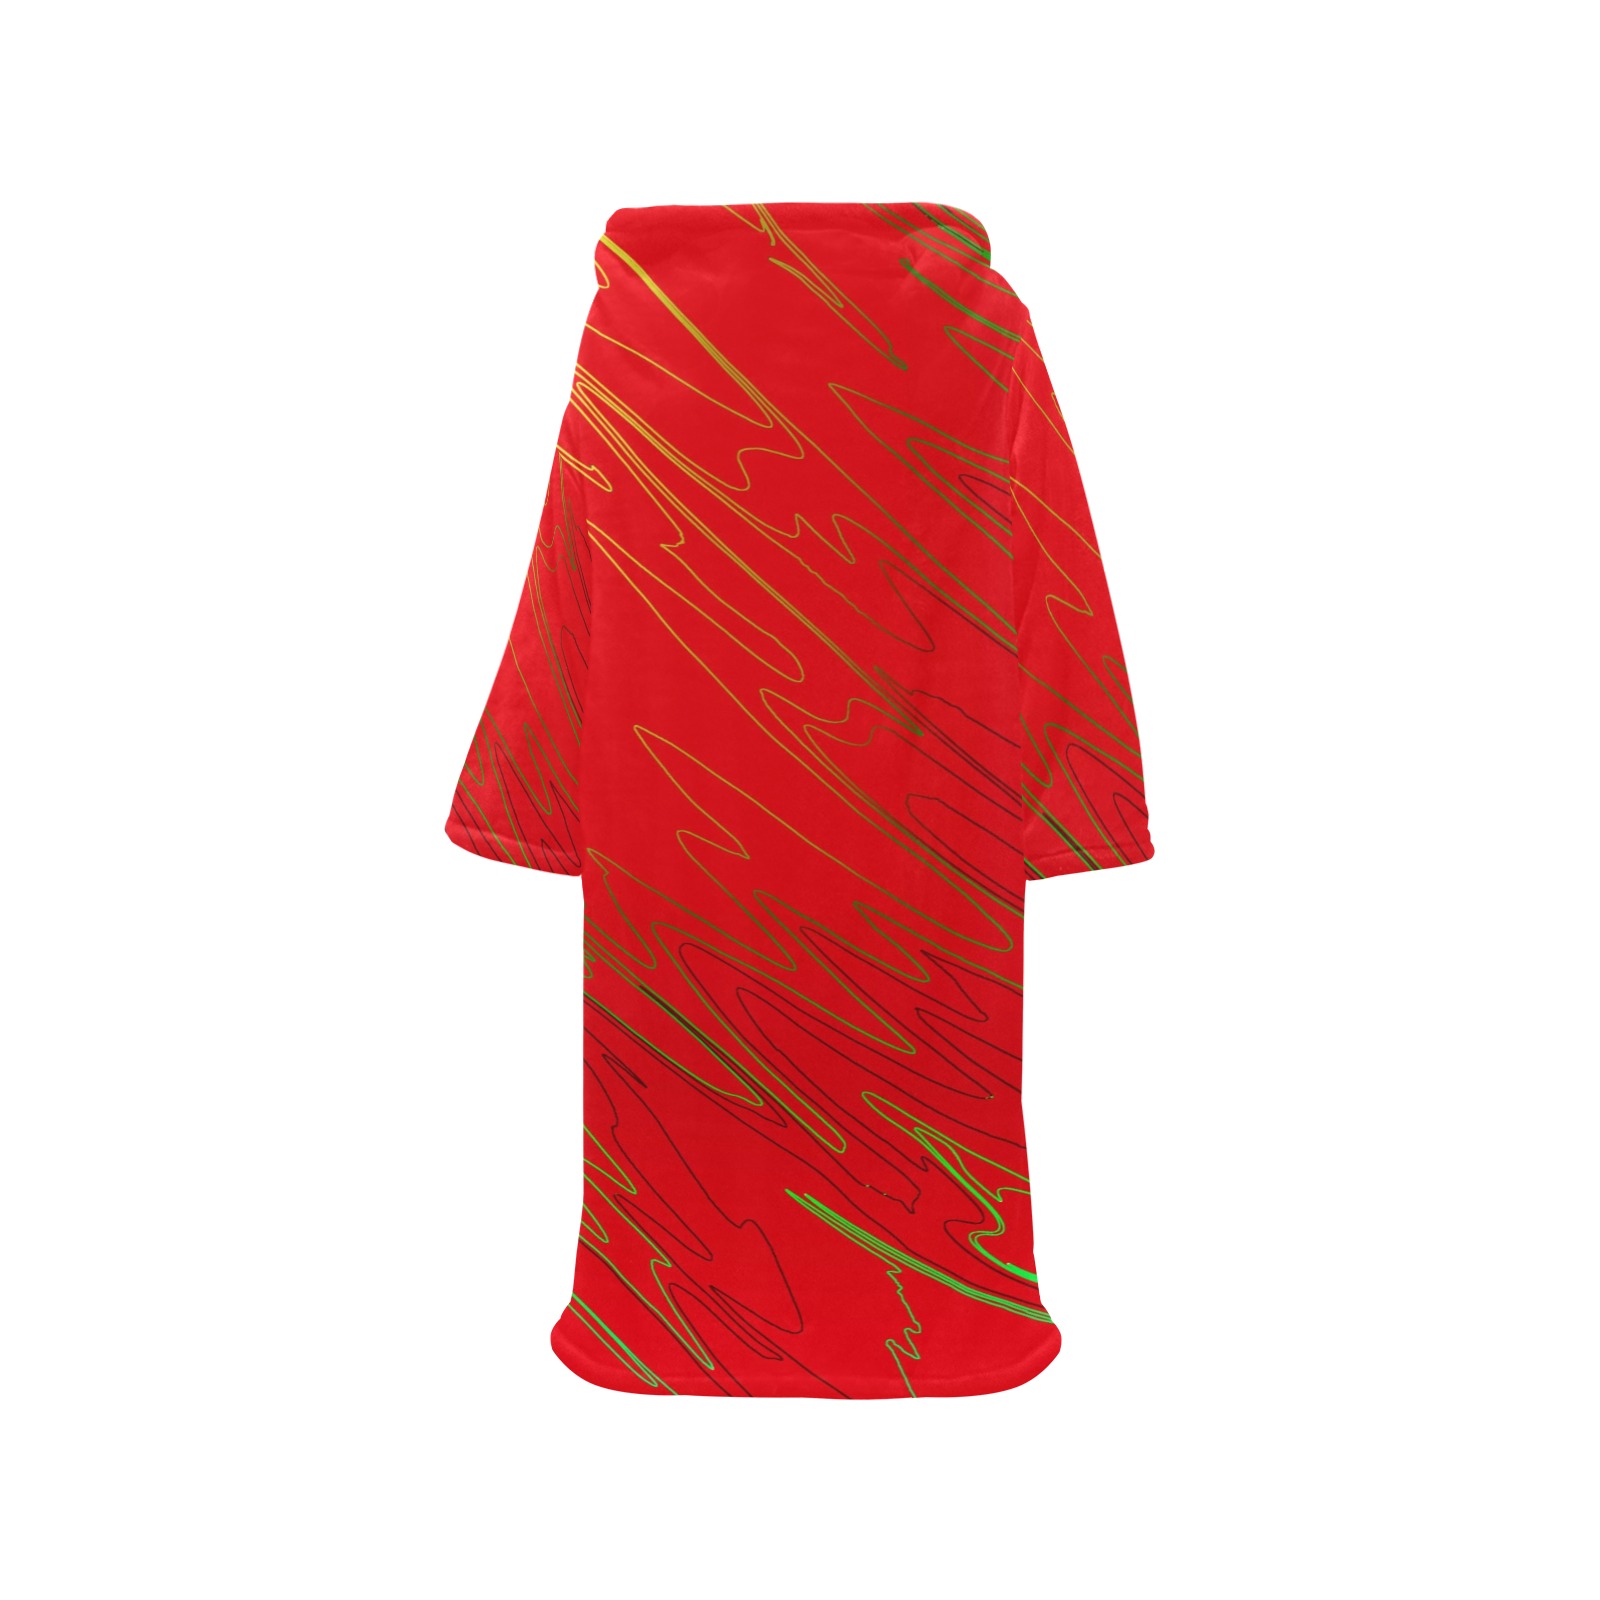 Marbled Red Blanket Robe with Sleeves for Adults